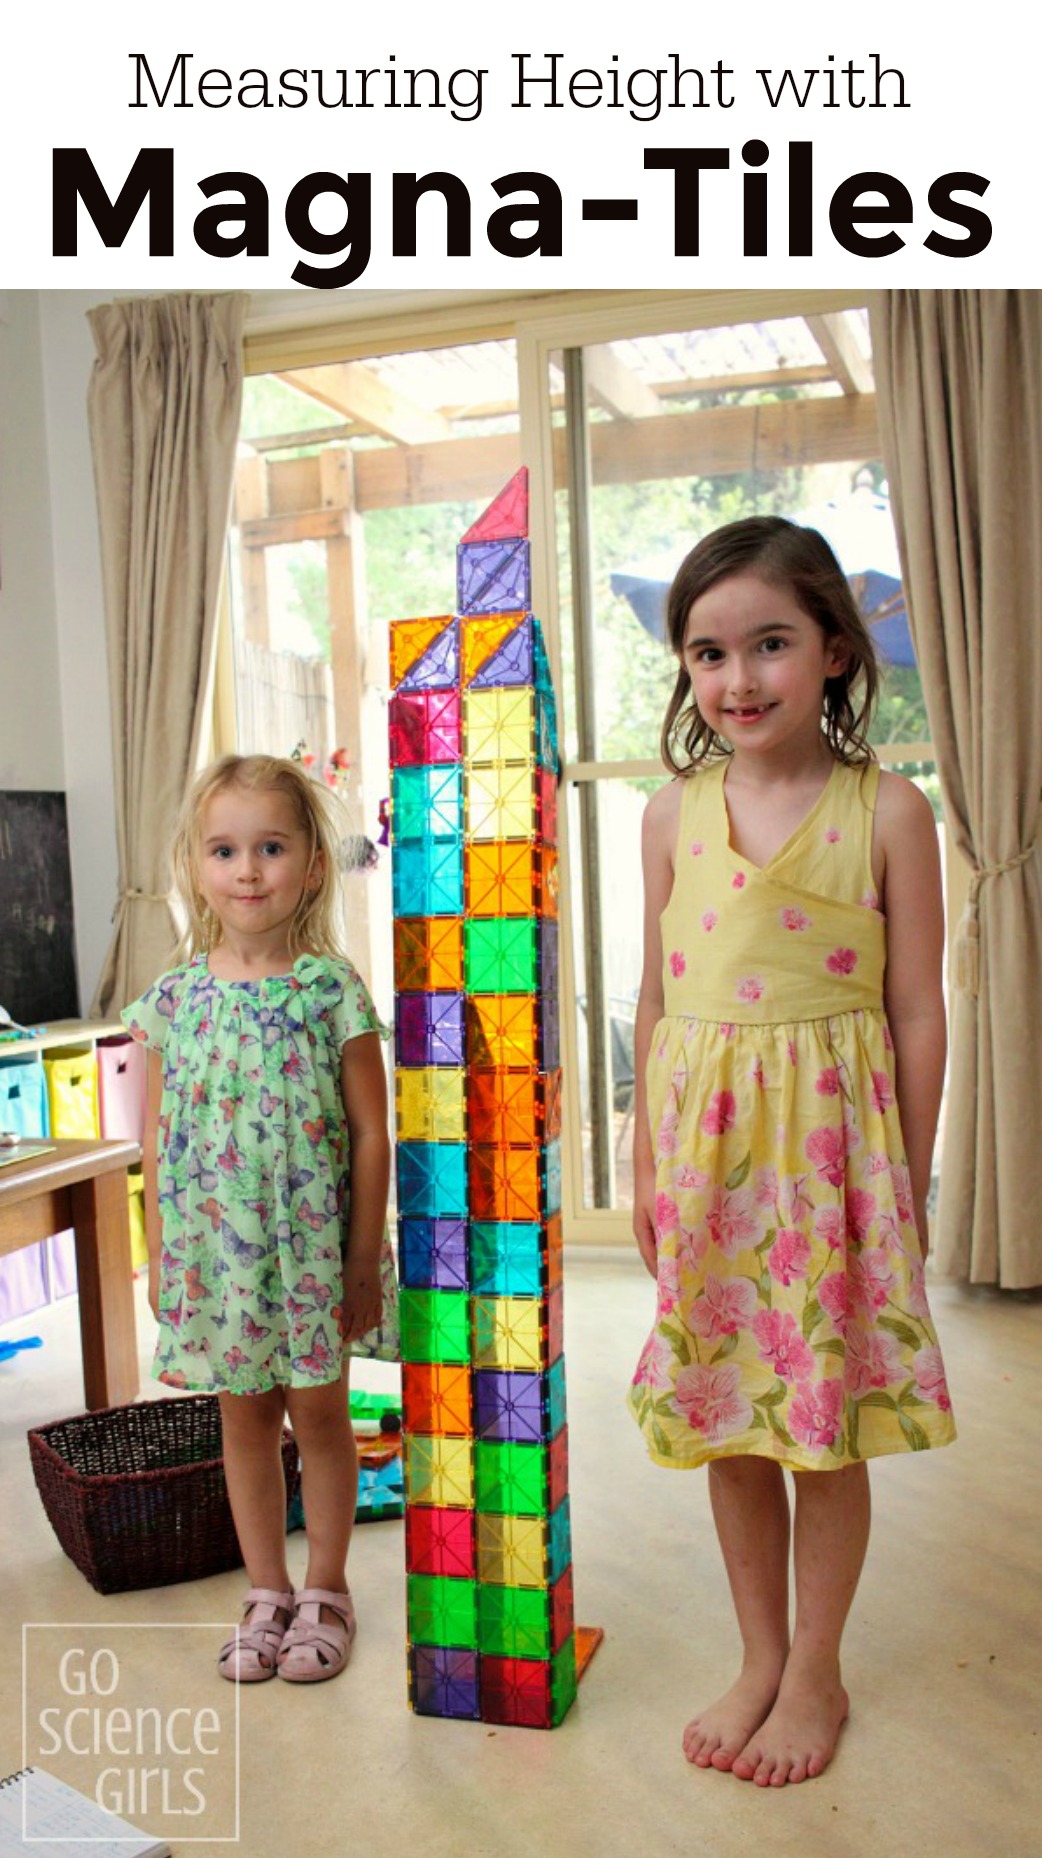 Measuring the height of kids with a Magna-Tiles tower is a fun way to practise math at home.